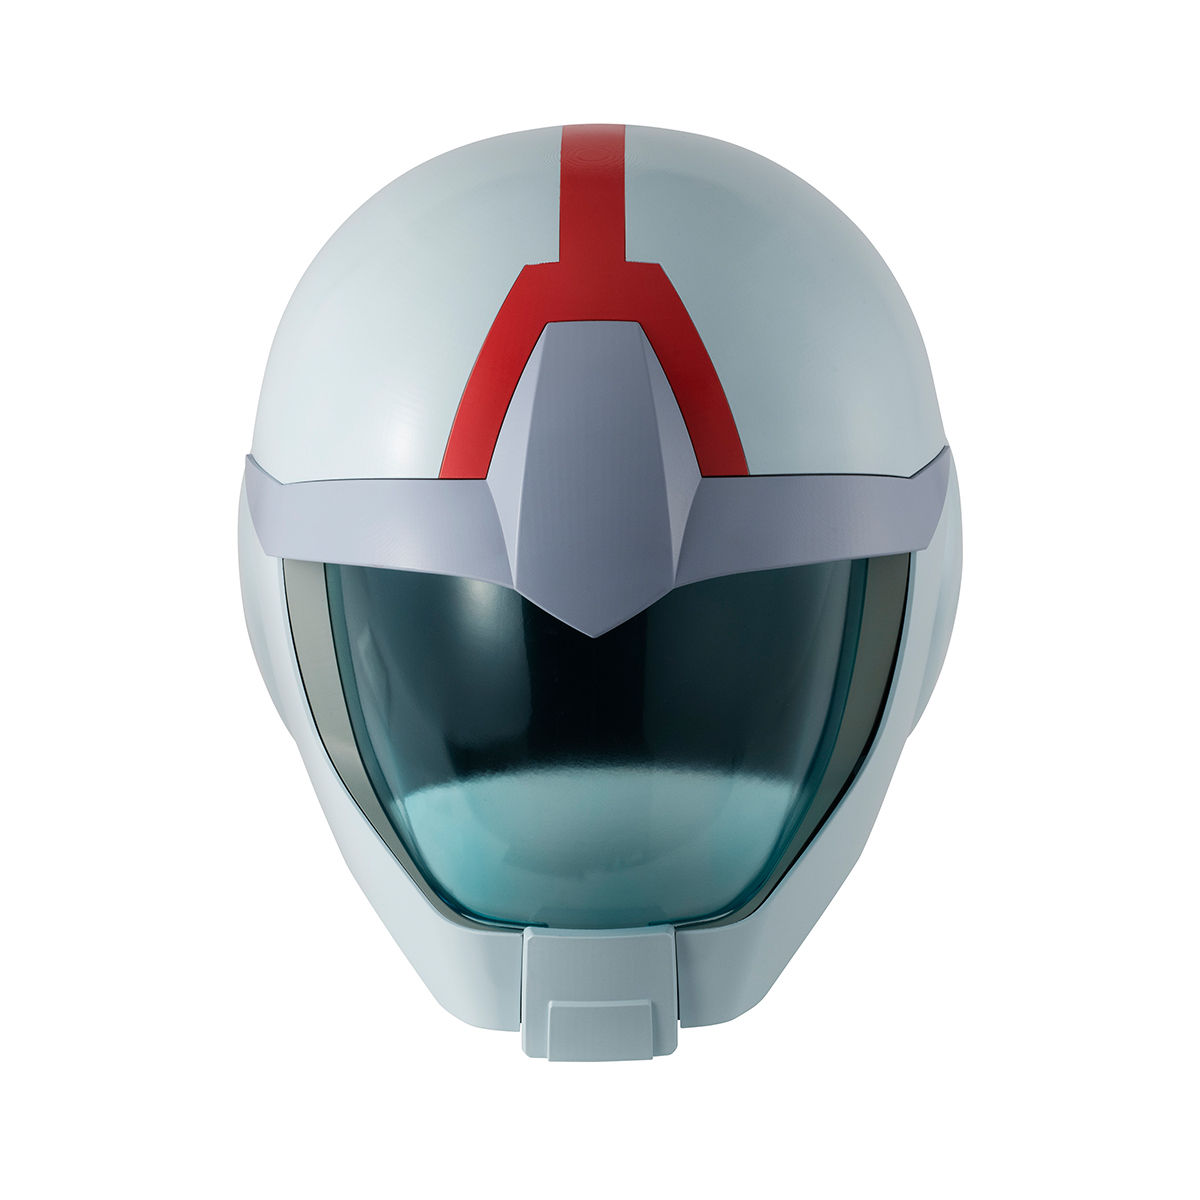 MegaHouse Full Scale Works Earth Federation Force Normal Suit Helmet